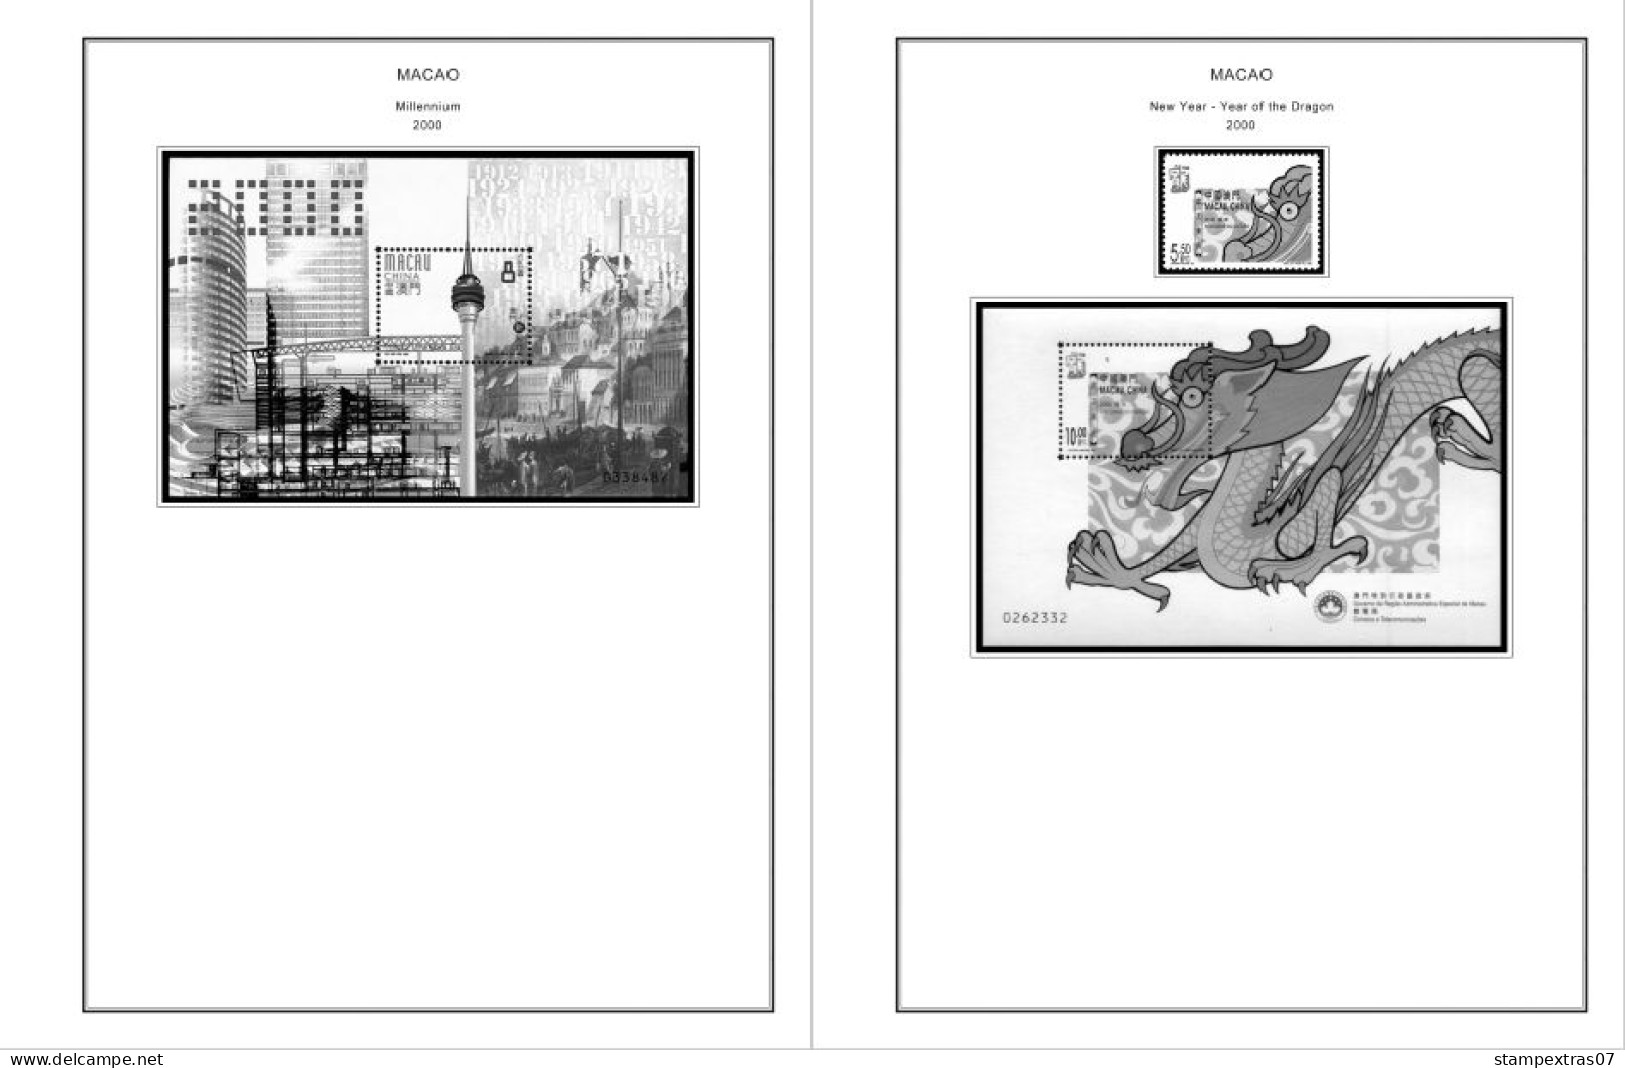 MACAO [SAR] 1999-2010 + 2011-2020 STAMP ALBUM PAGES (248 B&w Illustrated Pages) - Anglais